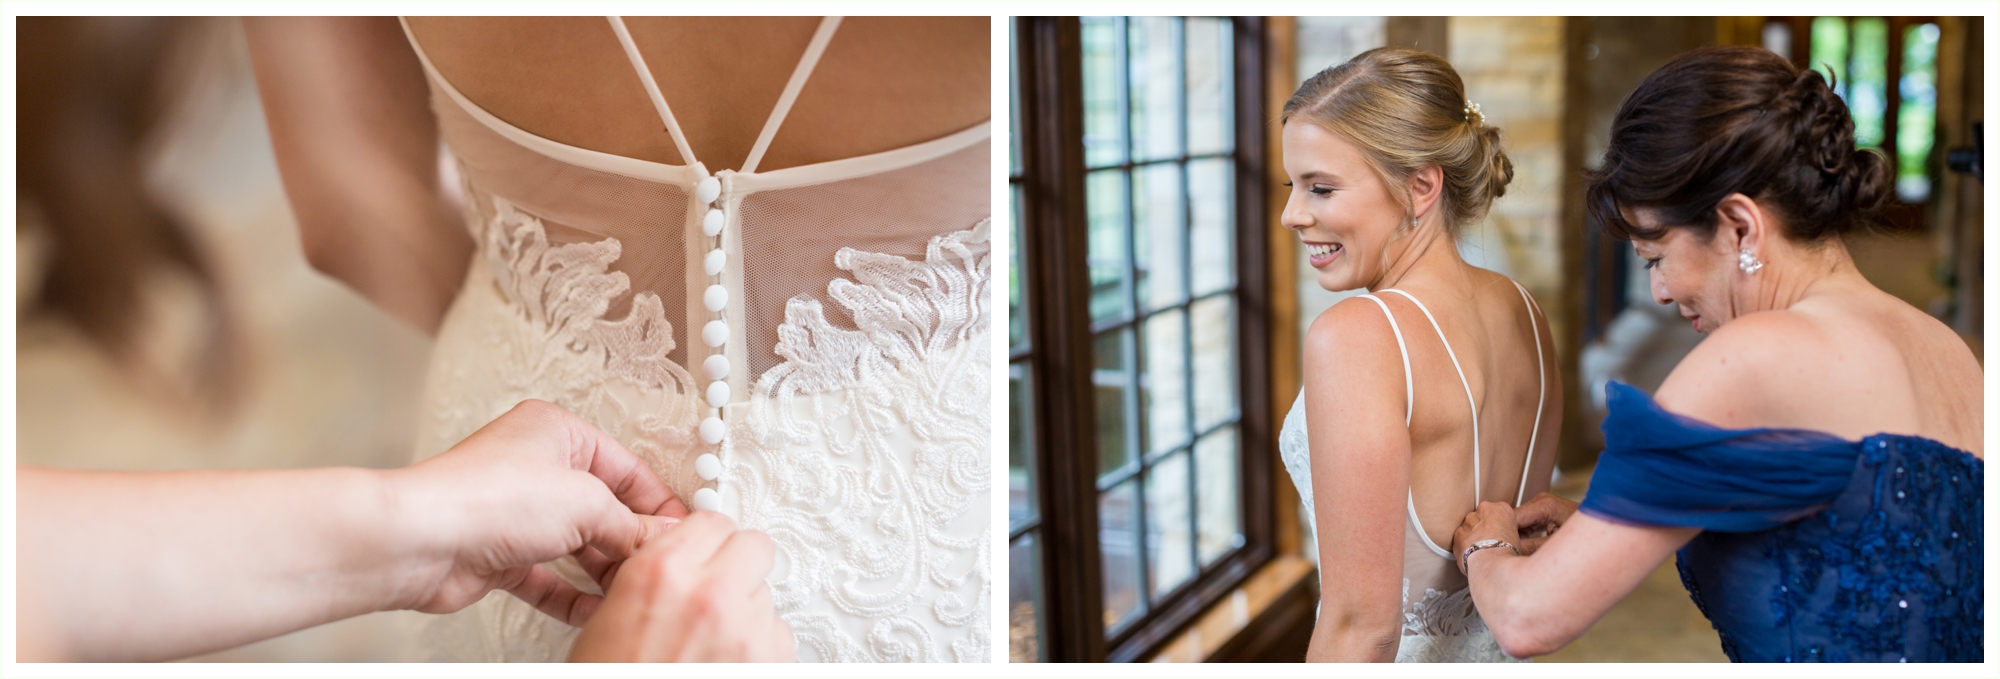 bride's dress gets buttoned during getting ready at santuary golf course